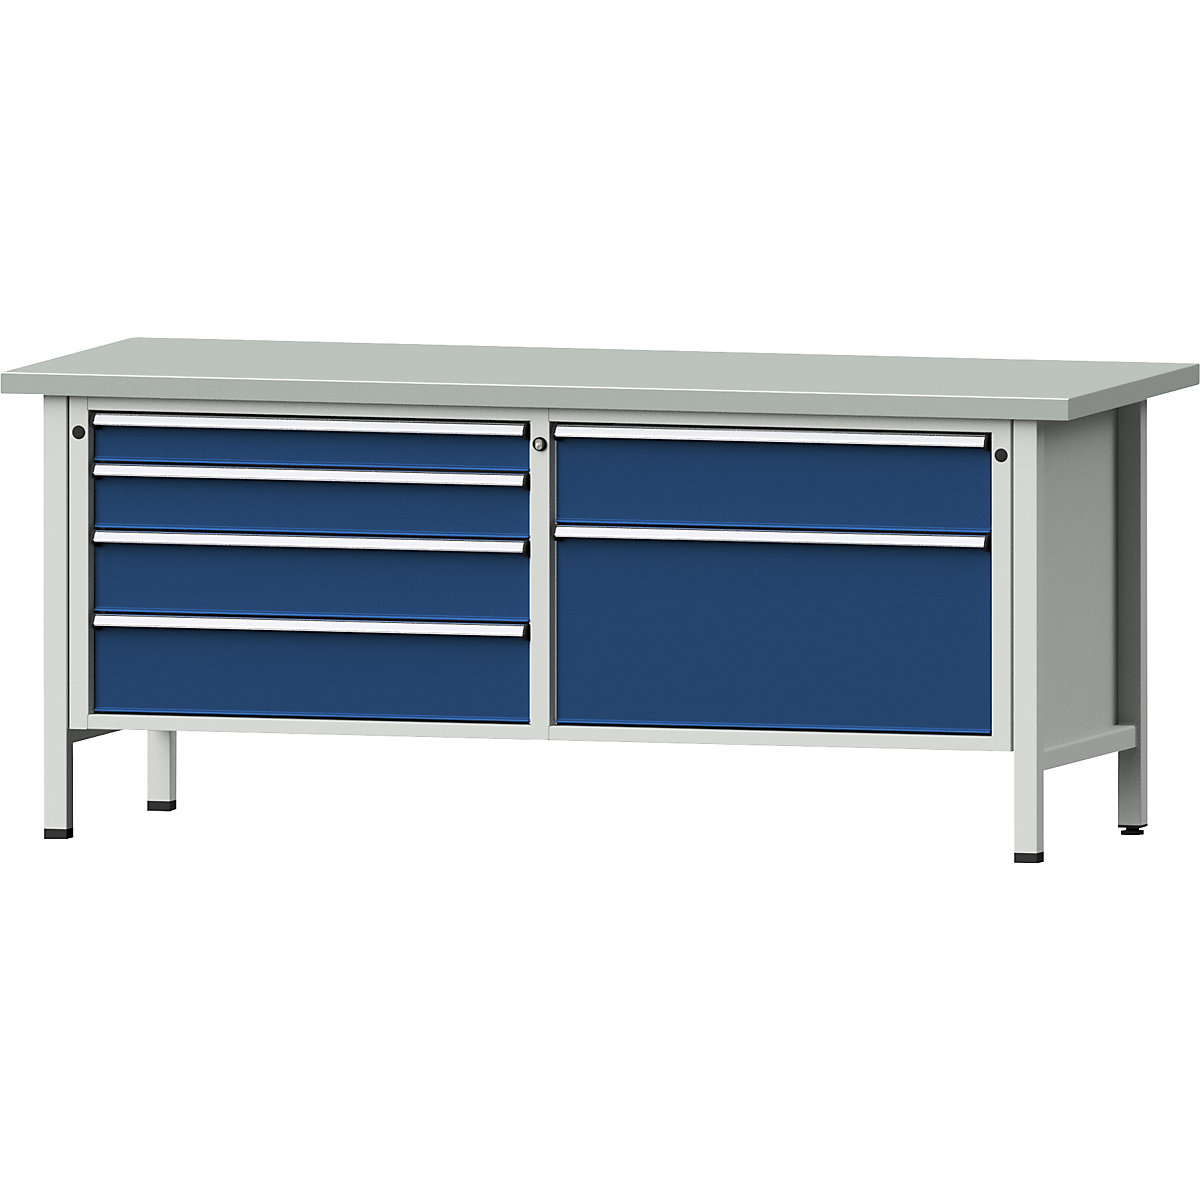 Workbench with XL/XXL drawers, frame construction – ANKE, width 2000 mm, 6 drawers, sheet steel covered worktop, front in gentian blue-12